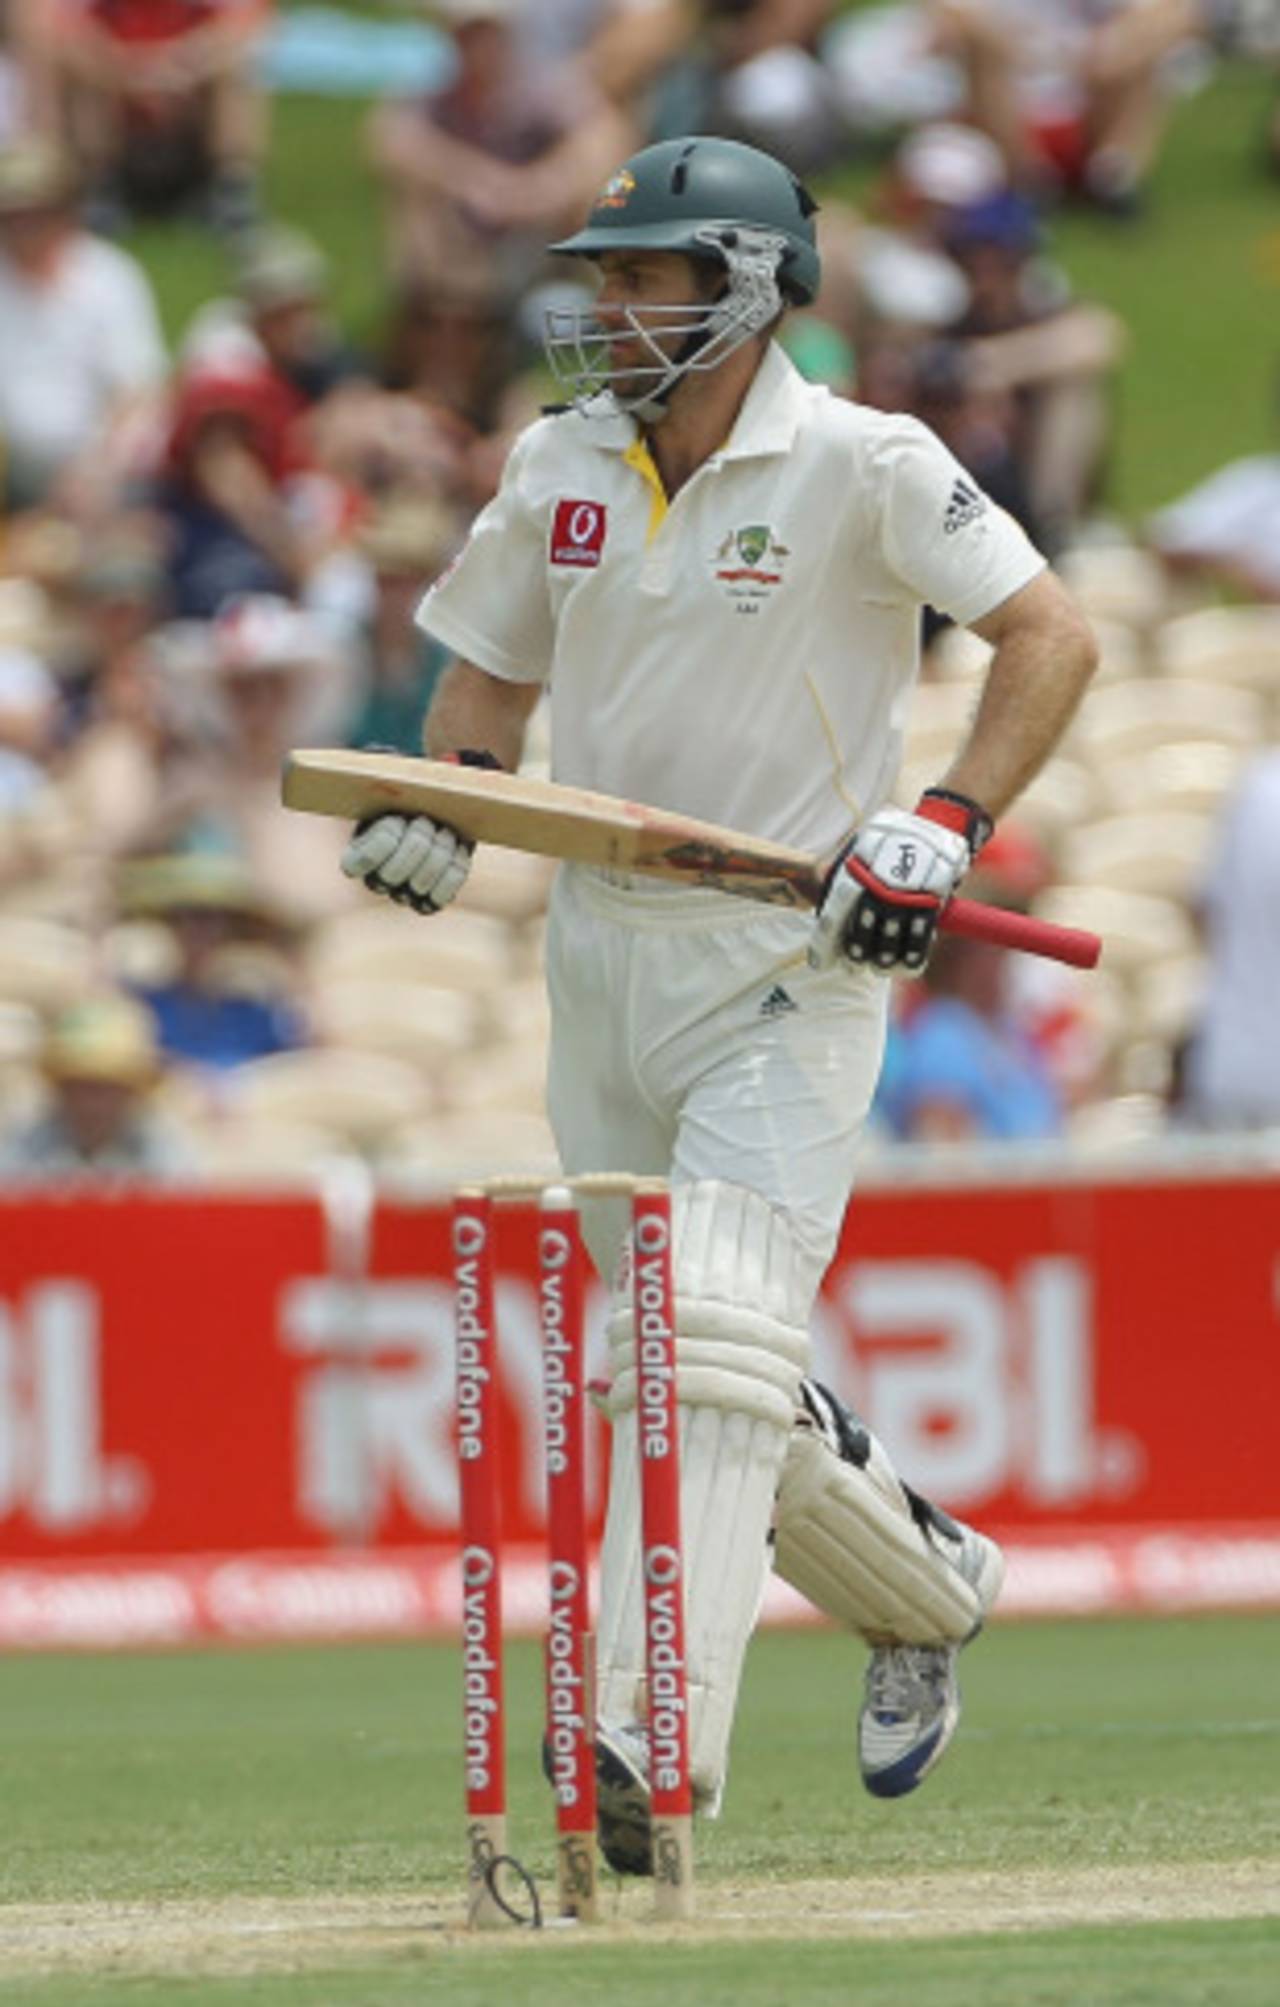 Simon Katich hobbles through for a run, struggling with an Achilles tendon injury, Australia v England, 2nd Test, Adelaide, 4th day, December 6, 2010